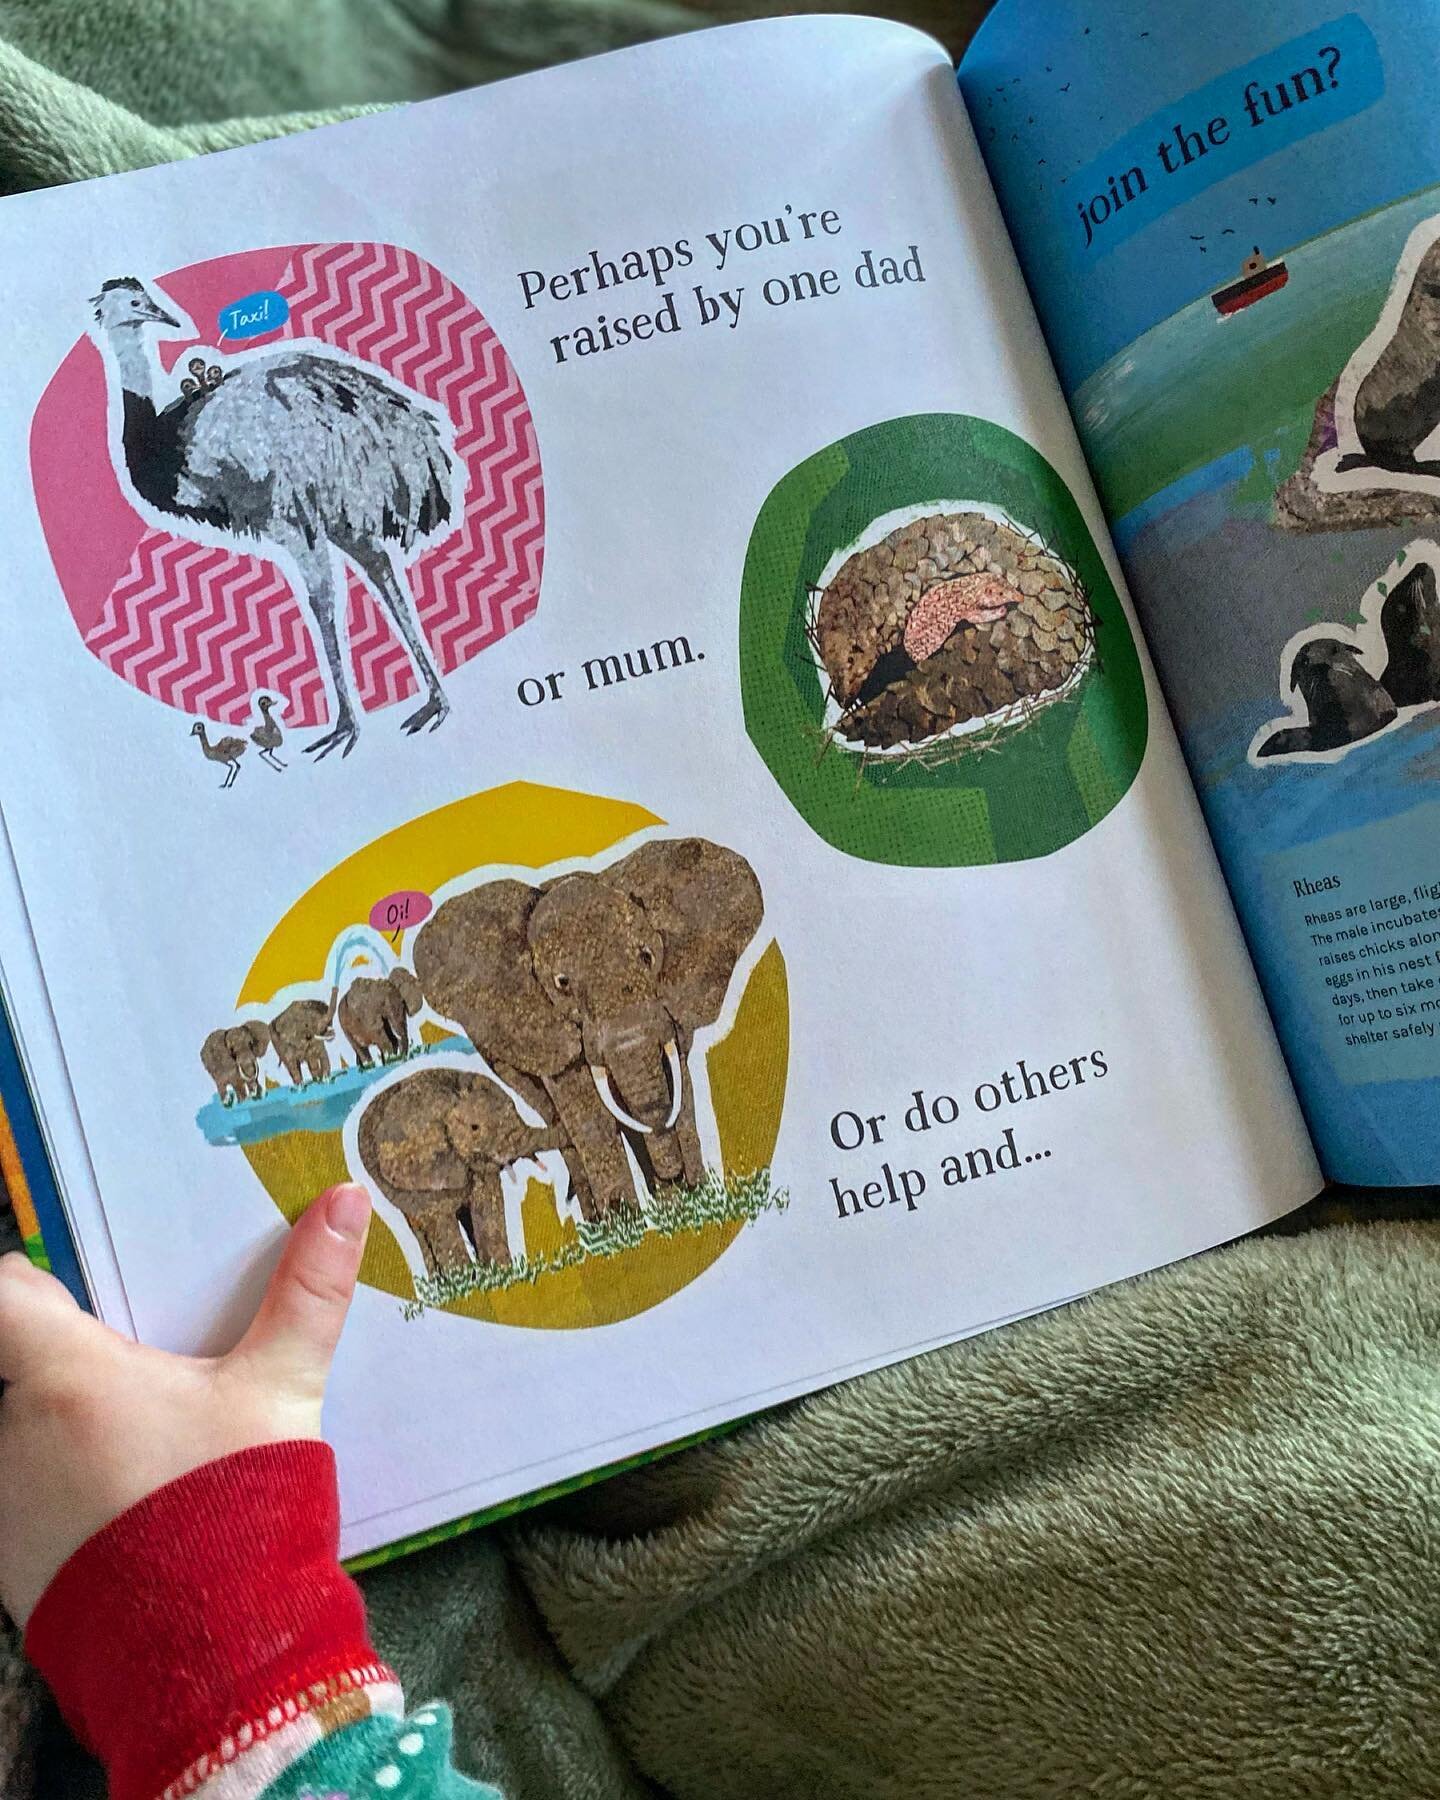 &ldquo;Perhaps you&rsquo;re raised by one dad or mum. Or do others help and join the fun?&rdquo; One of the great facts we love telling children when we&rsquo;re reading our book to them&hellip; The Galapagos Seal Lion use childcare! Sea Lion parents